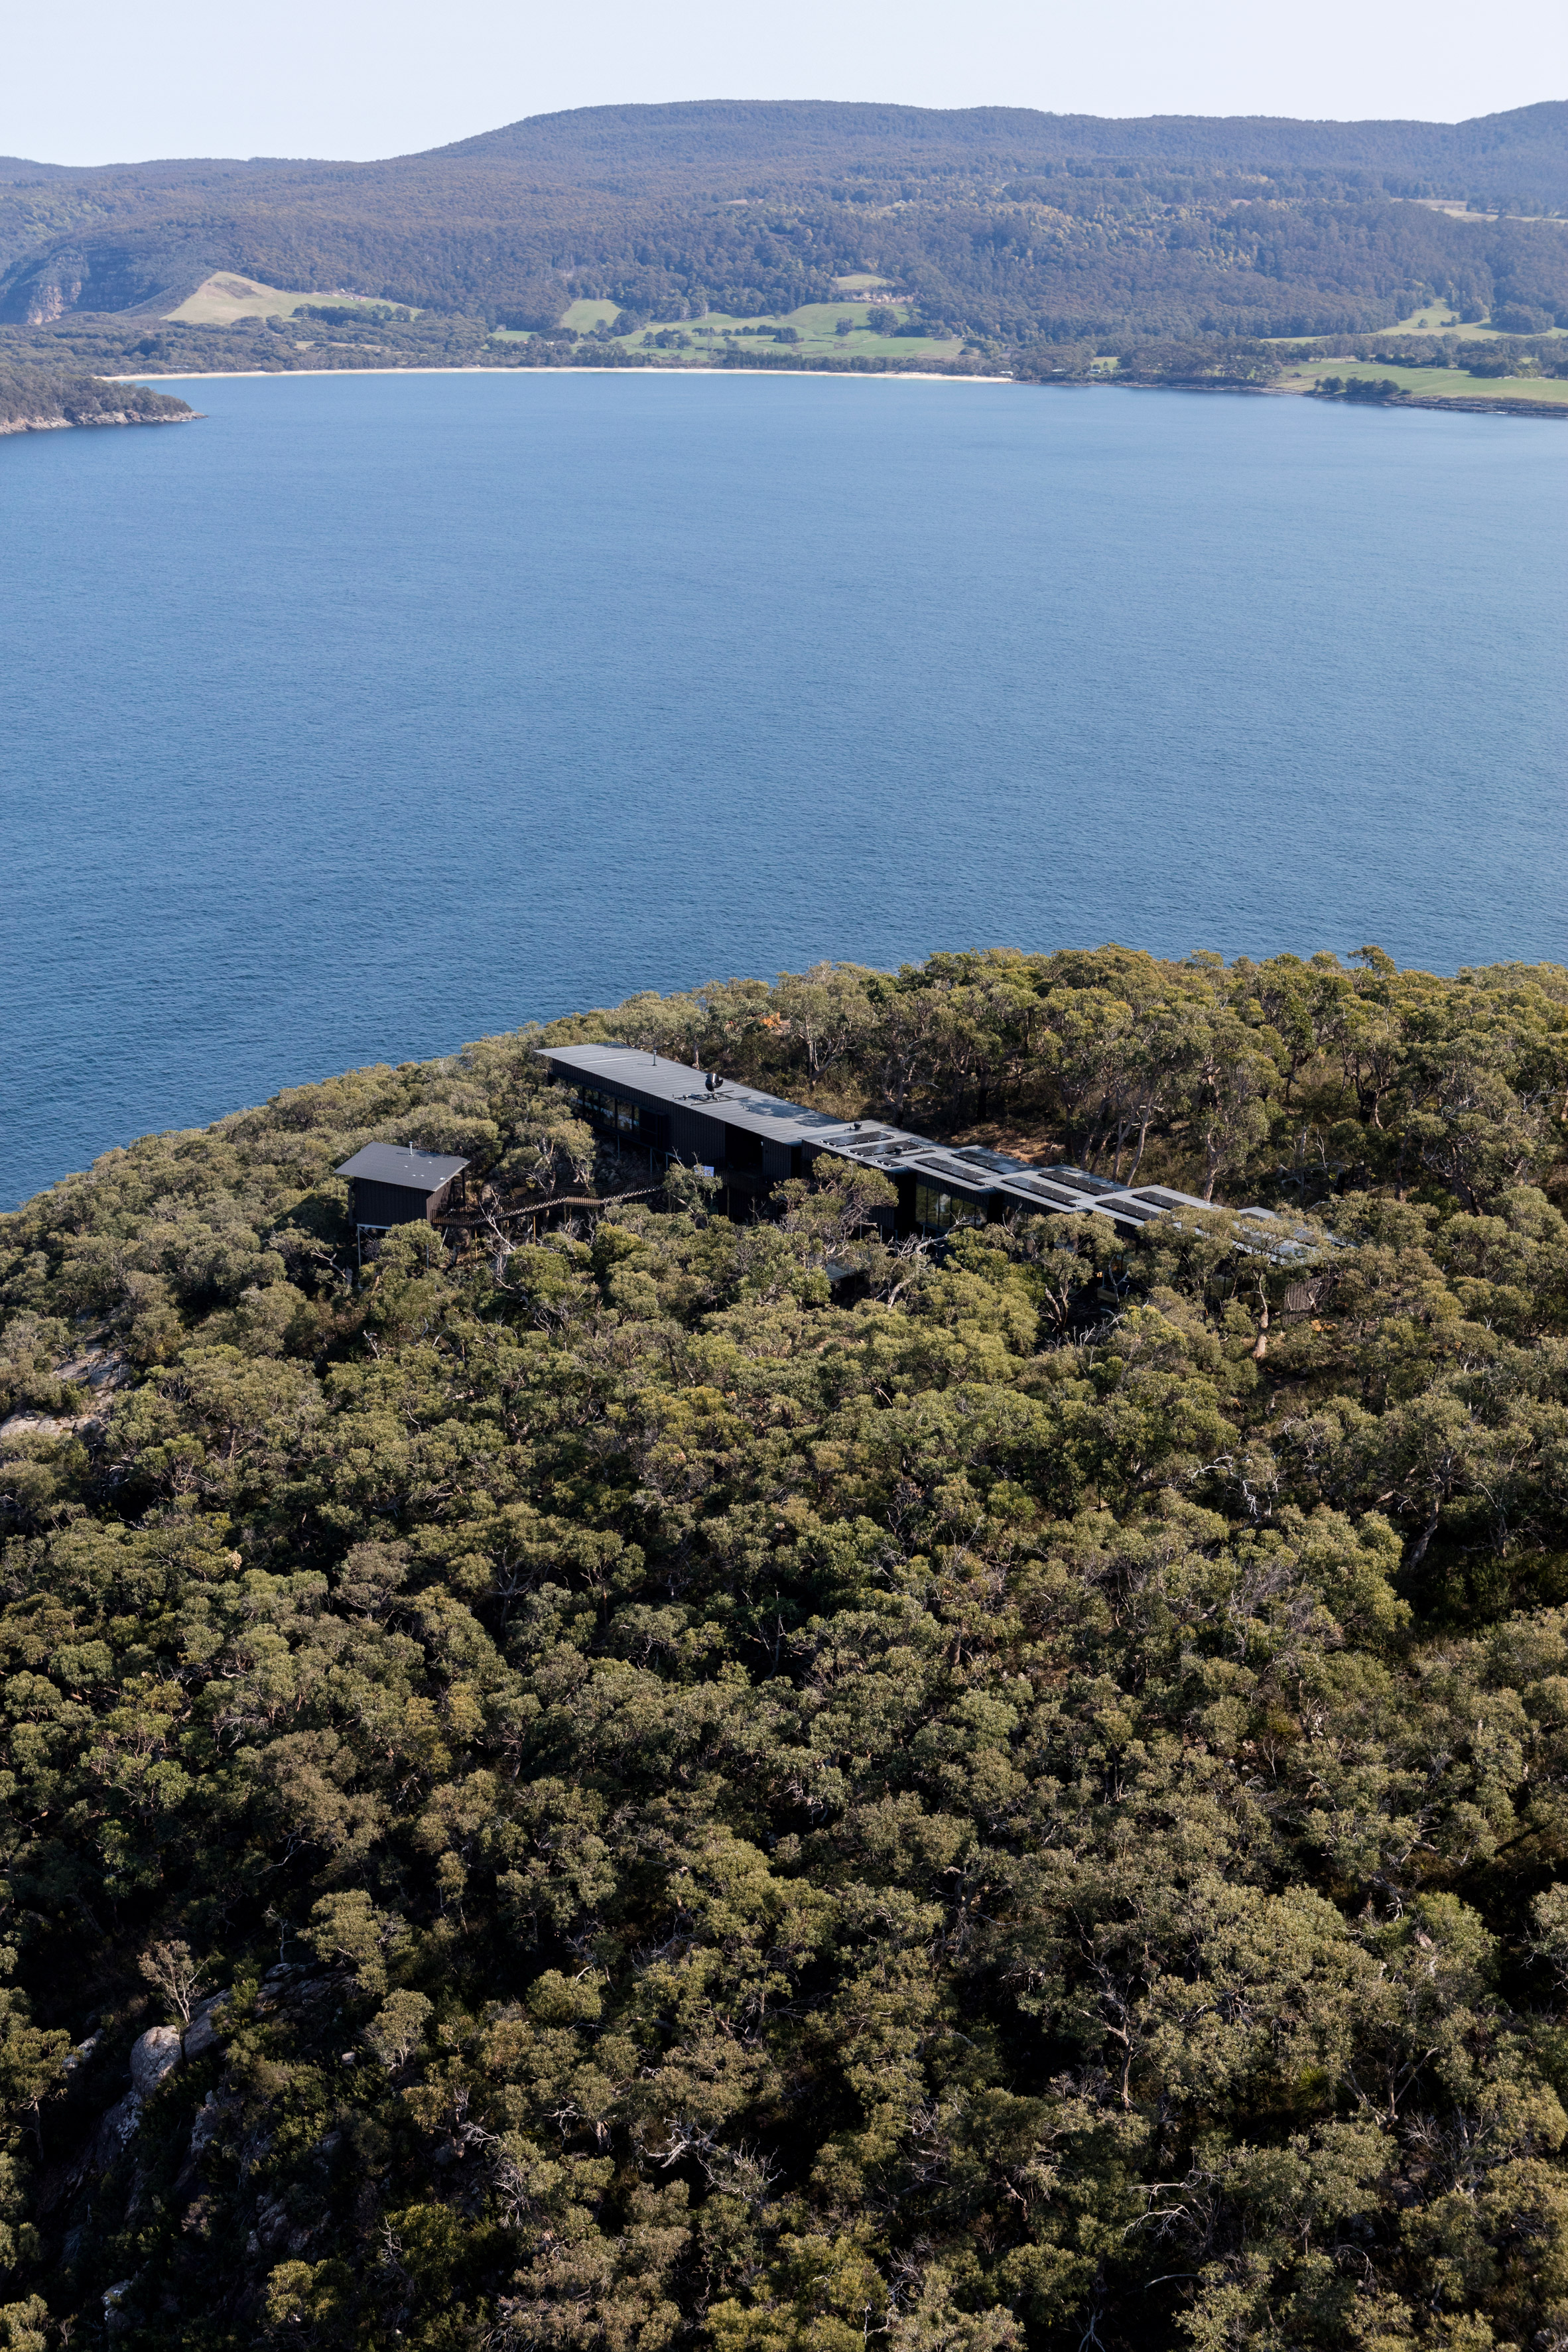 Three Capes Track Hiking Lodges designed by Andrew Burns Architecture